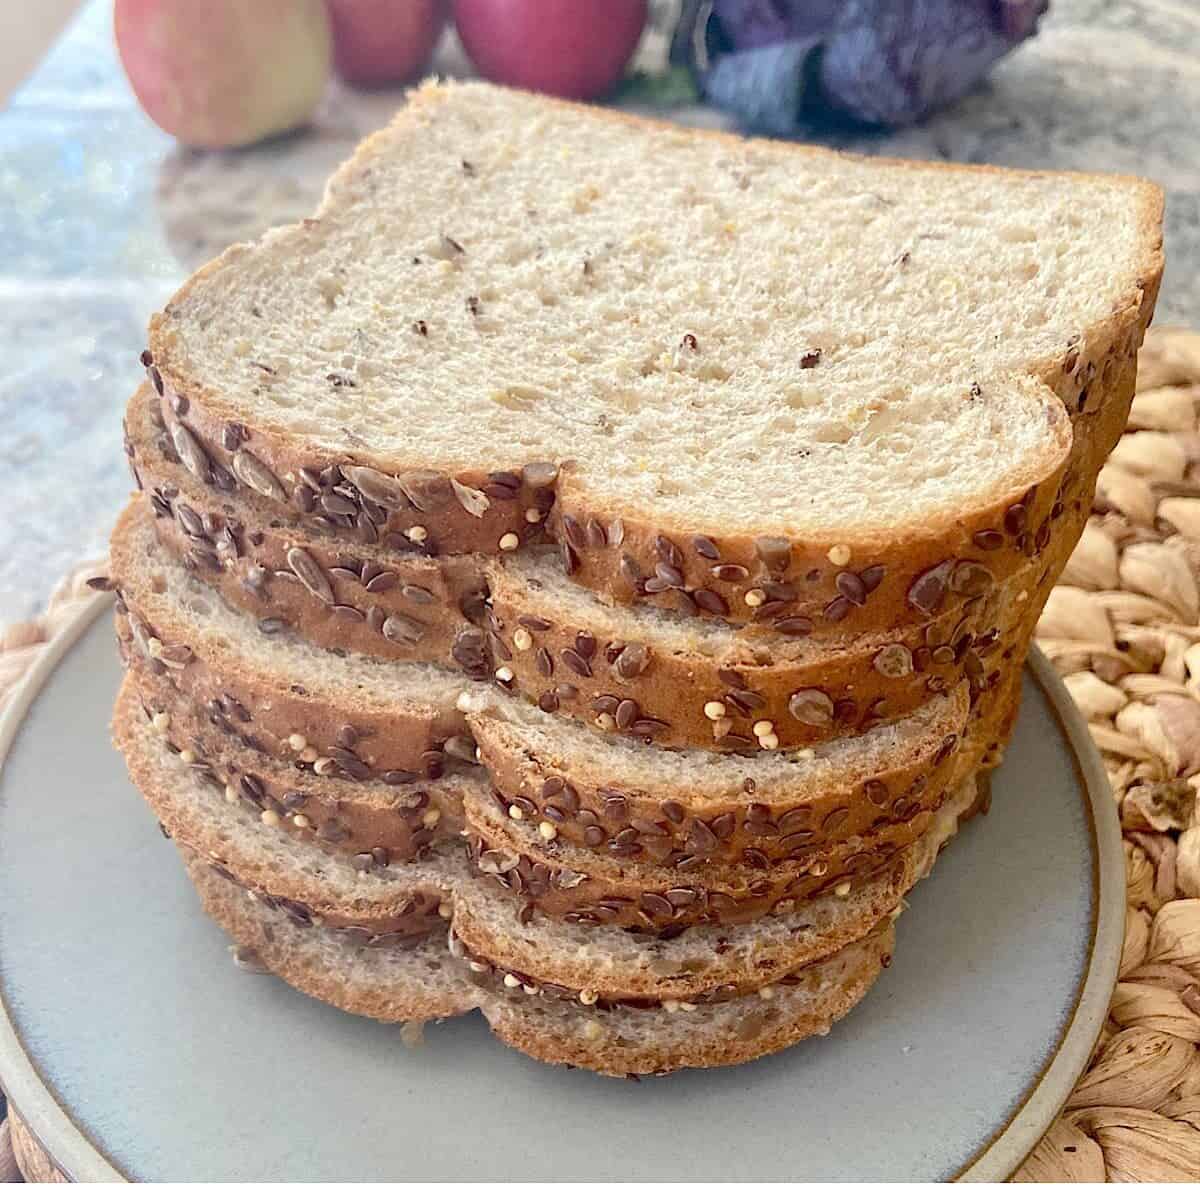 6 slices of whole grain bread on a plate.